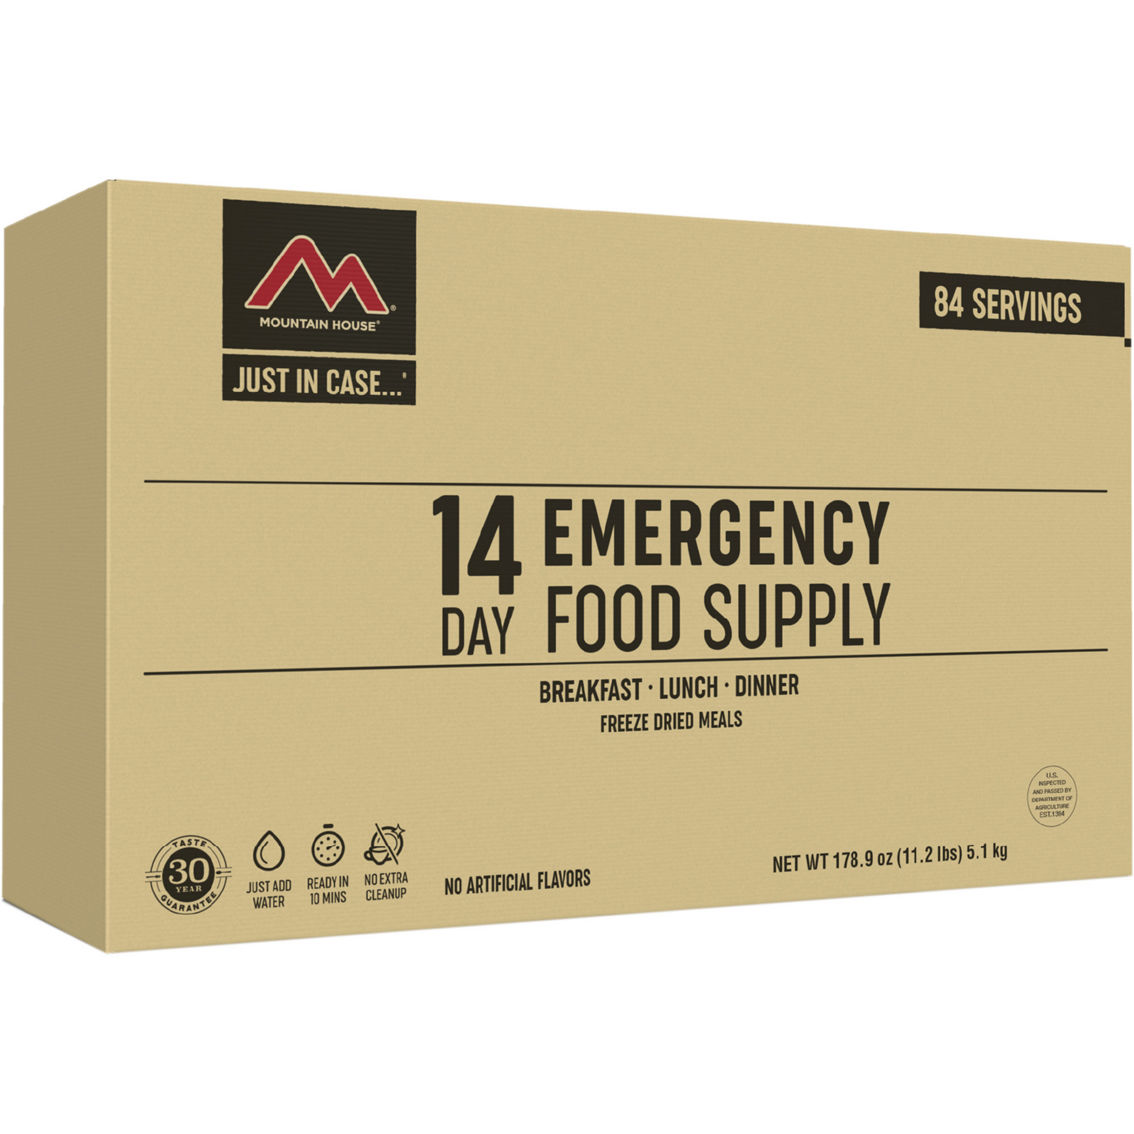 Mountain House 14 Day Emergency Food Kit - Image 3 of 4